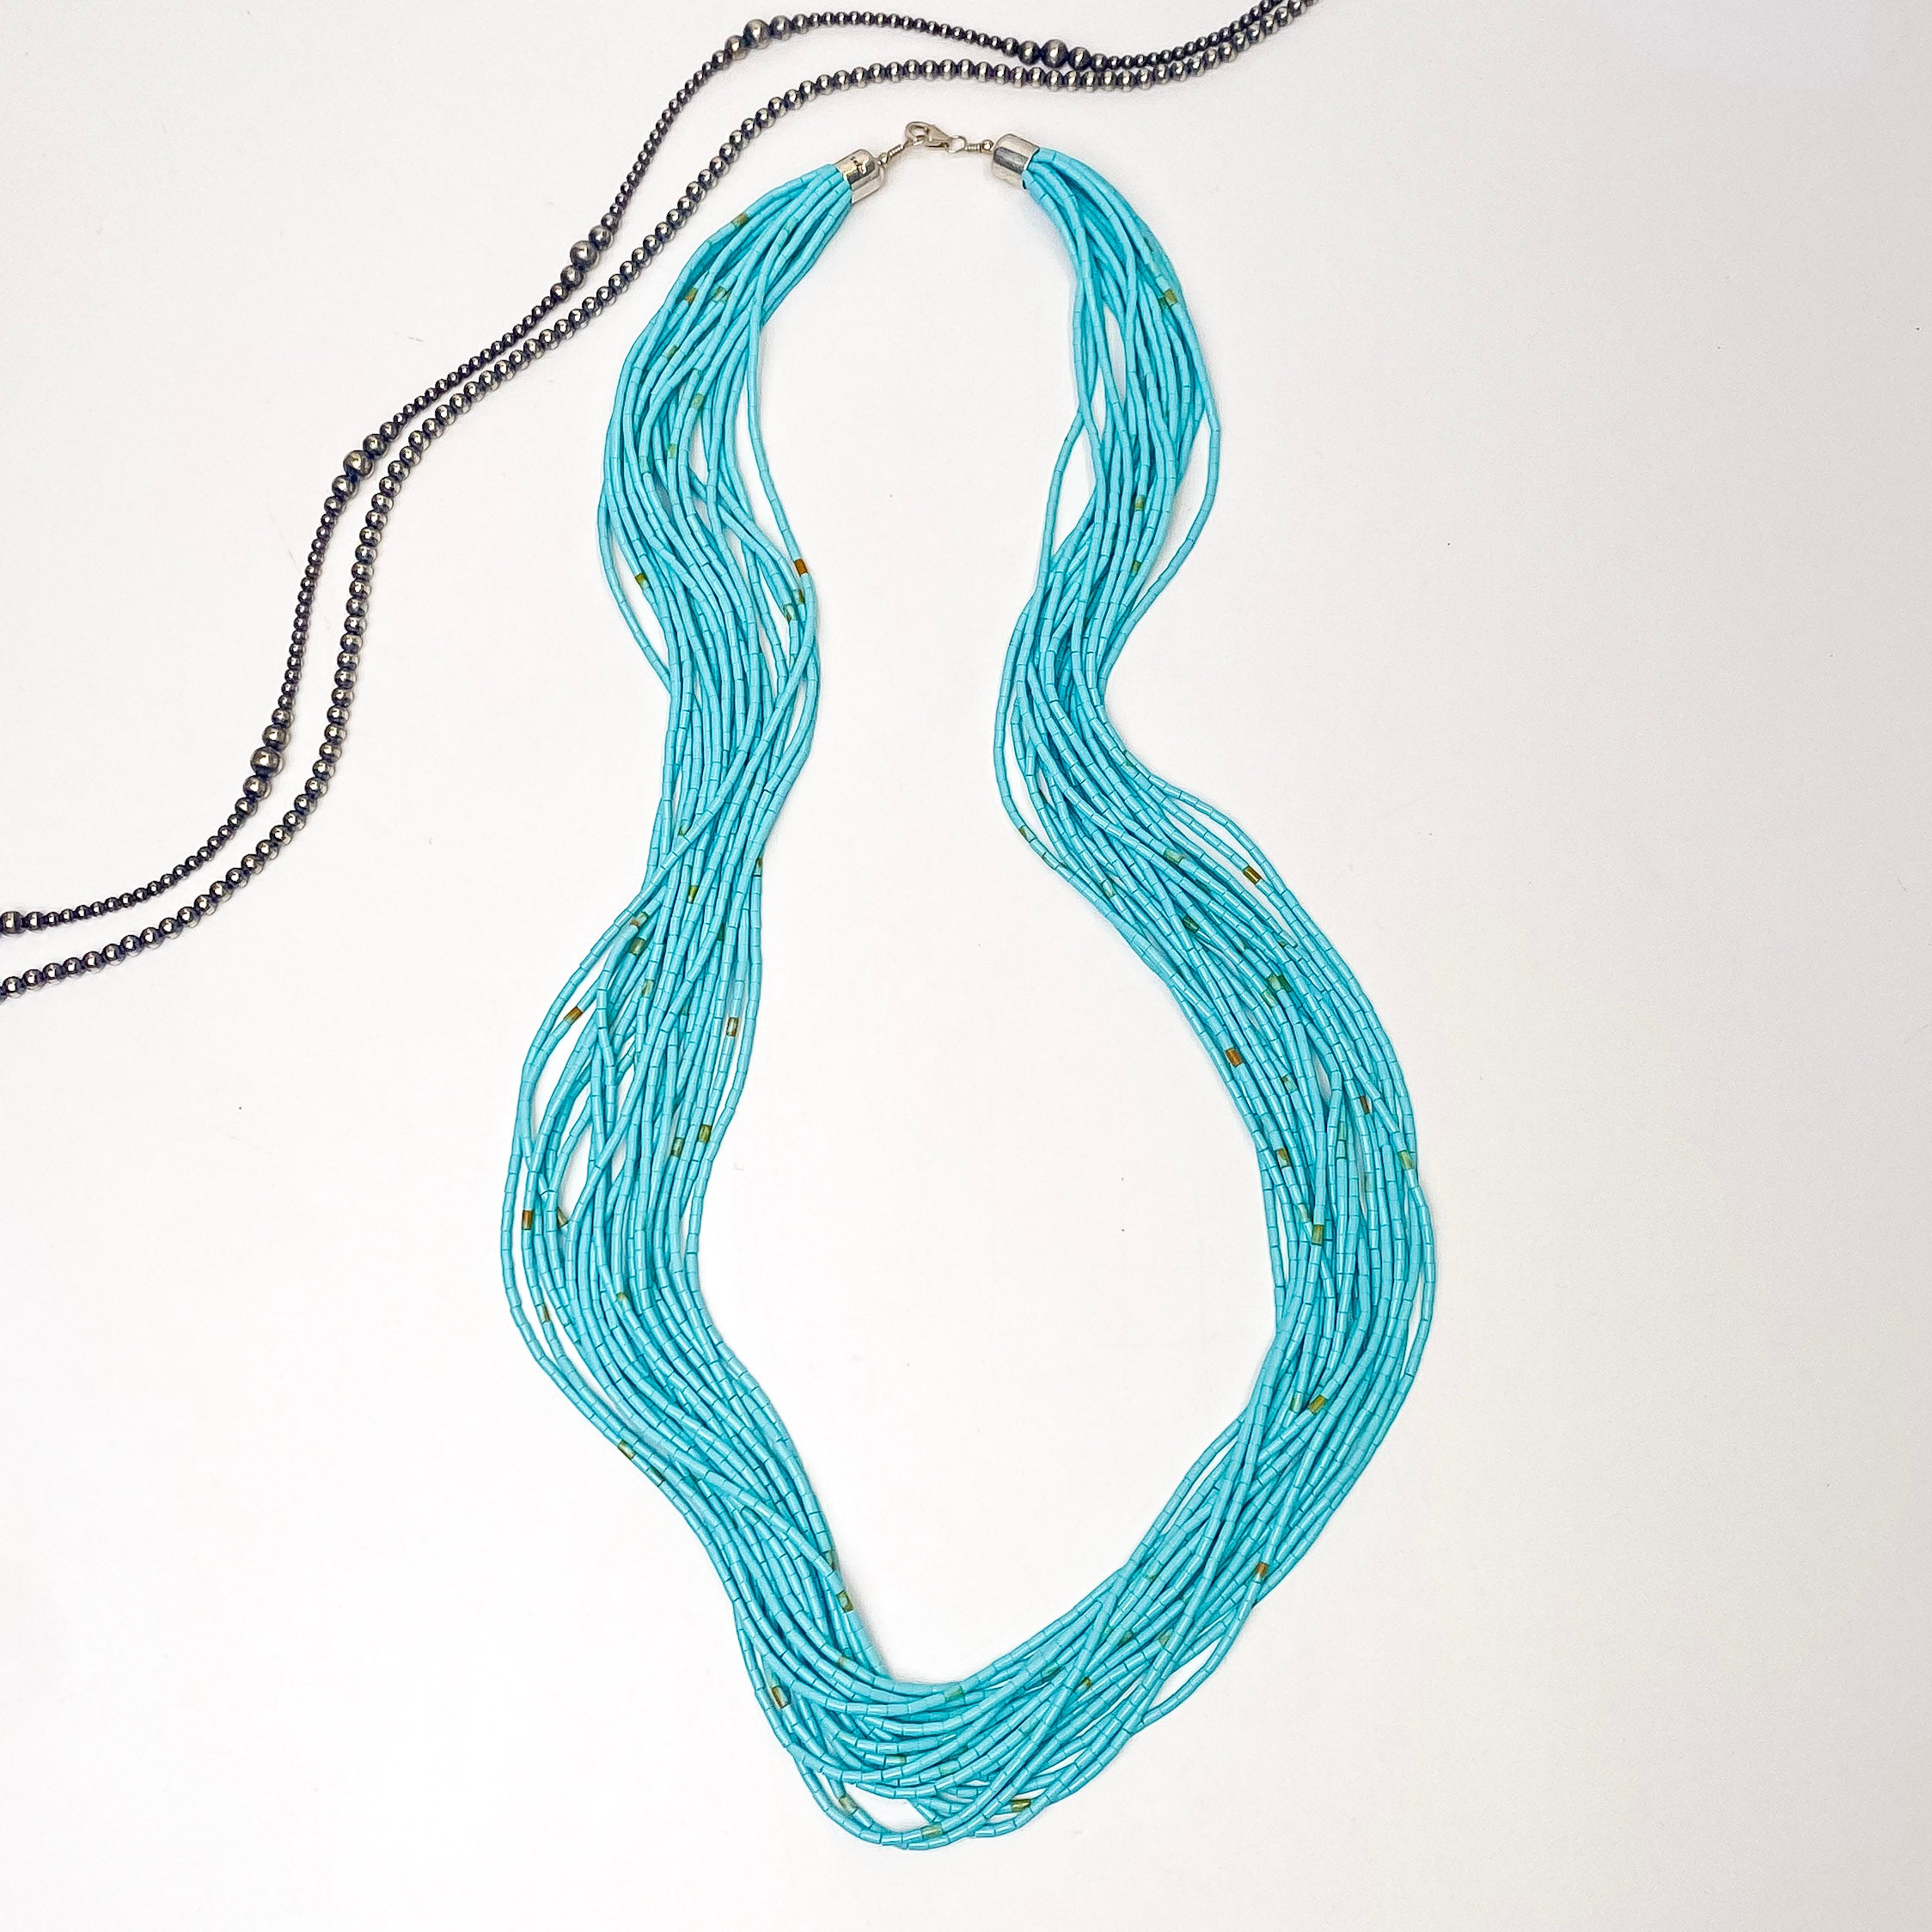 In the picture is a 20 strand turquoise necklace with heishi beads with a white background